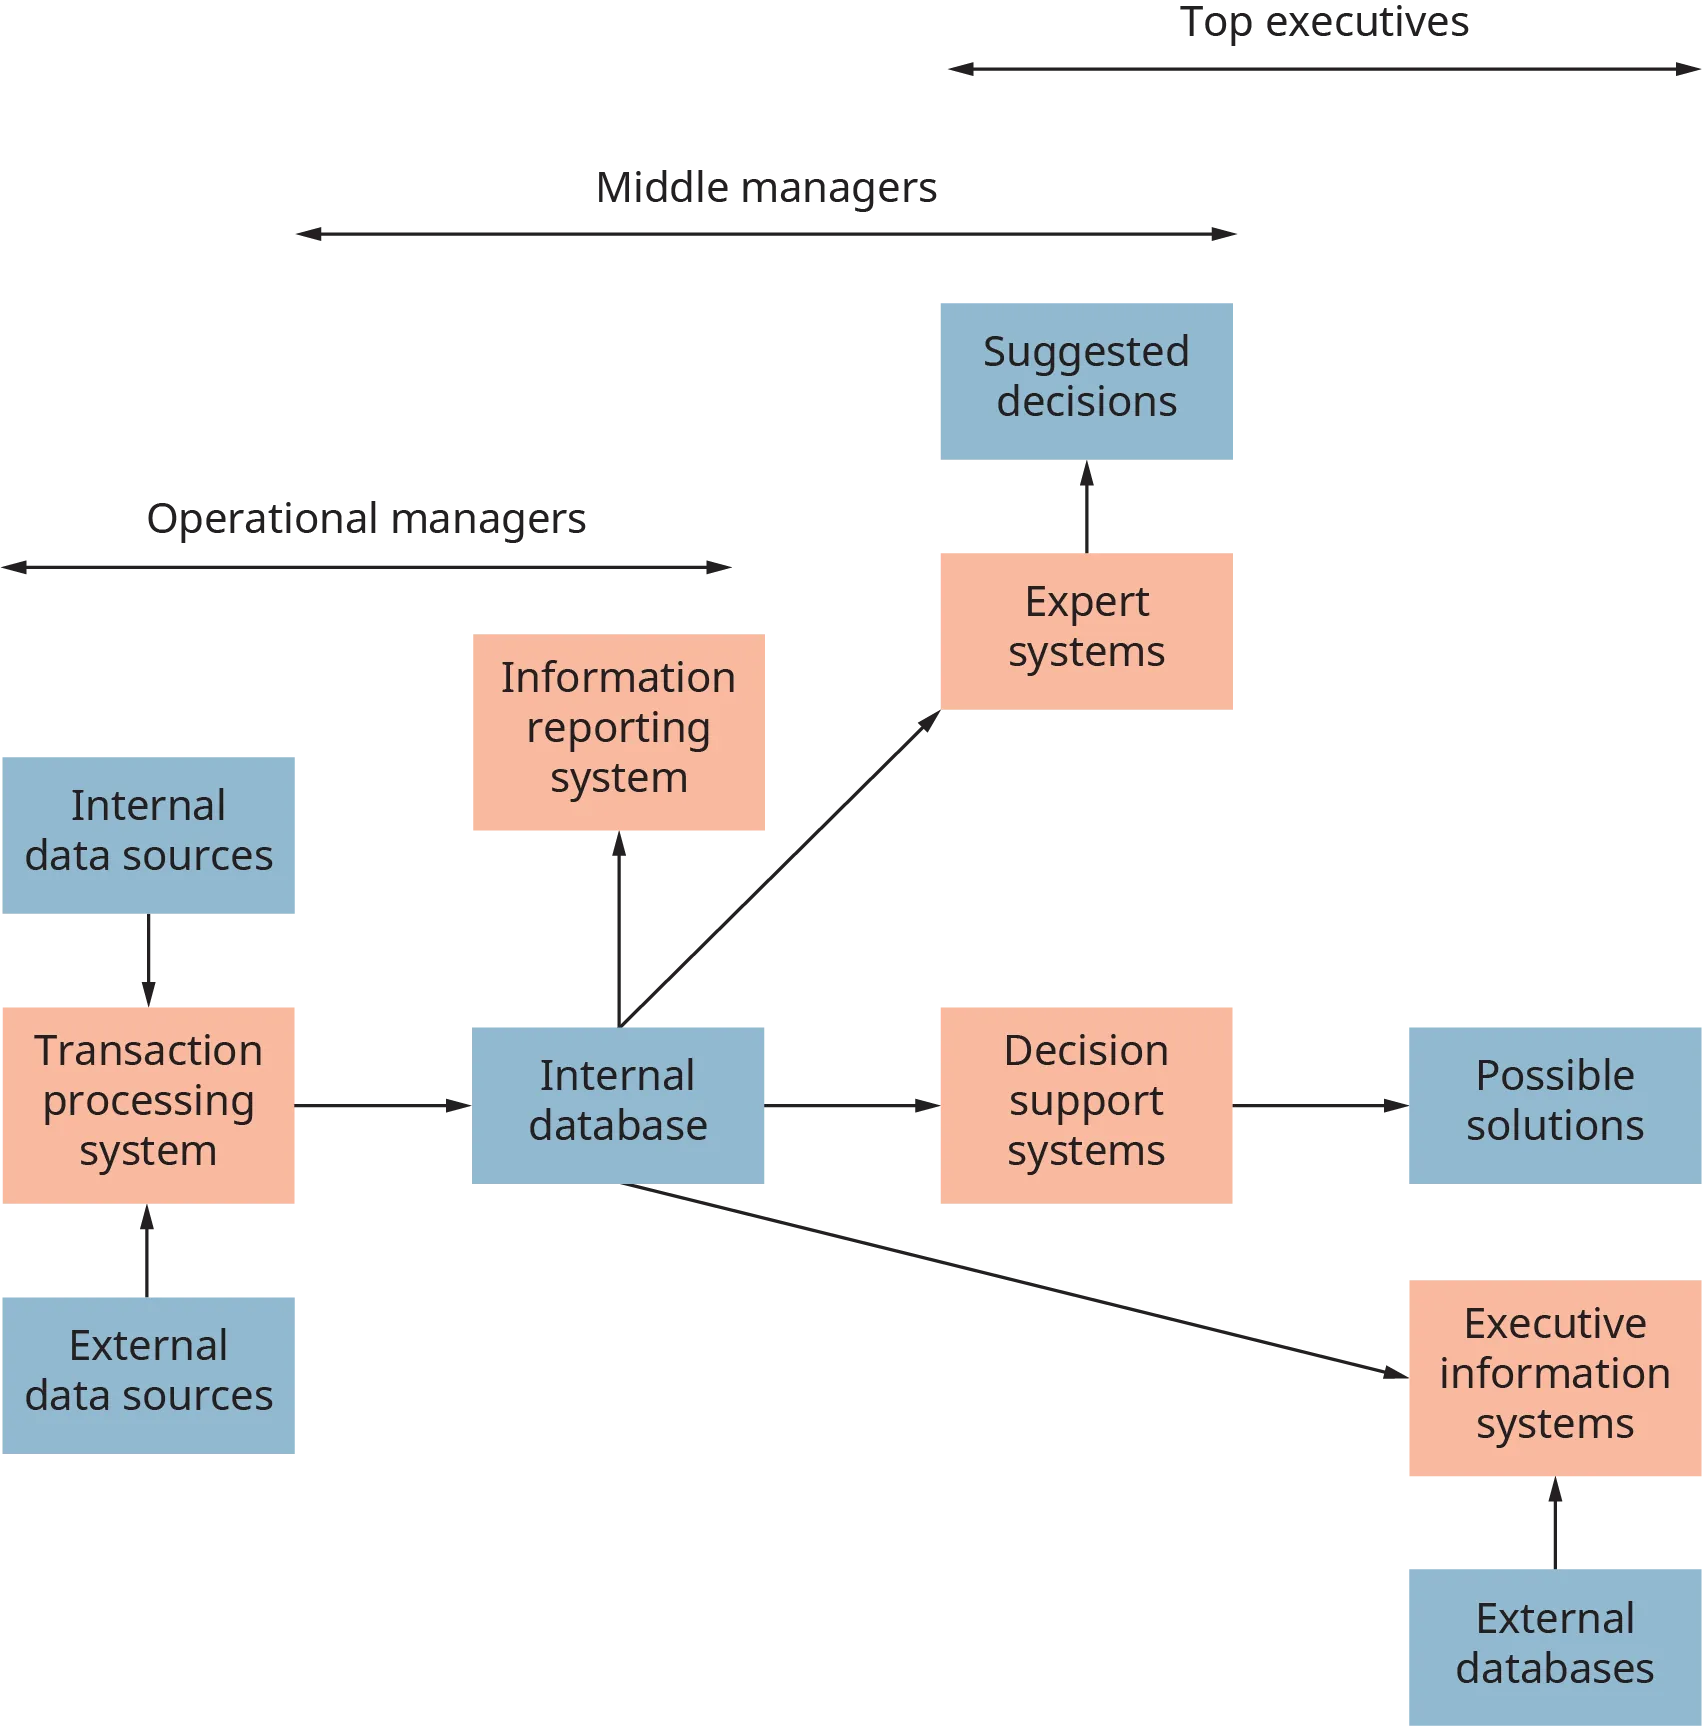 The Operational manager’s domain is where internal and external data sources flow into a transaction processing system. This flows into an internal data base, and now is in the overlap domain of operational managers and middle managers. There are 4 branches from the internal database. First, information reporting system. The next 3 branches are overlapped by middle managers and top executives. Second branch goes to expert systems, and to suggested decisions. Third branch goes to decision support, then to possible solutions, under top executives only. The fourth branch goes to executive information systems, which are fed by external databases, and are top executive domain.